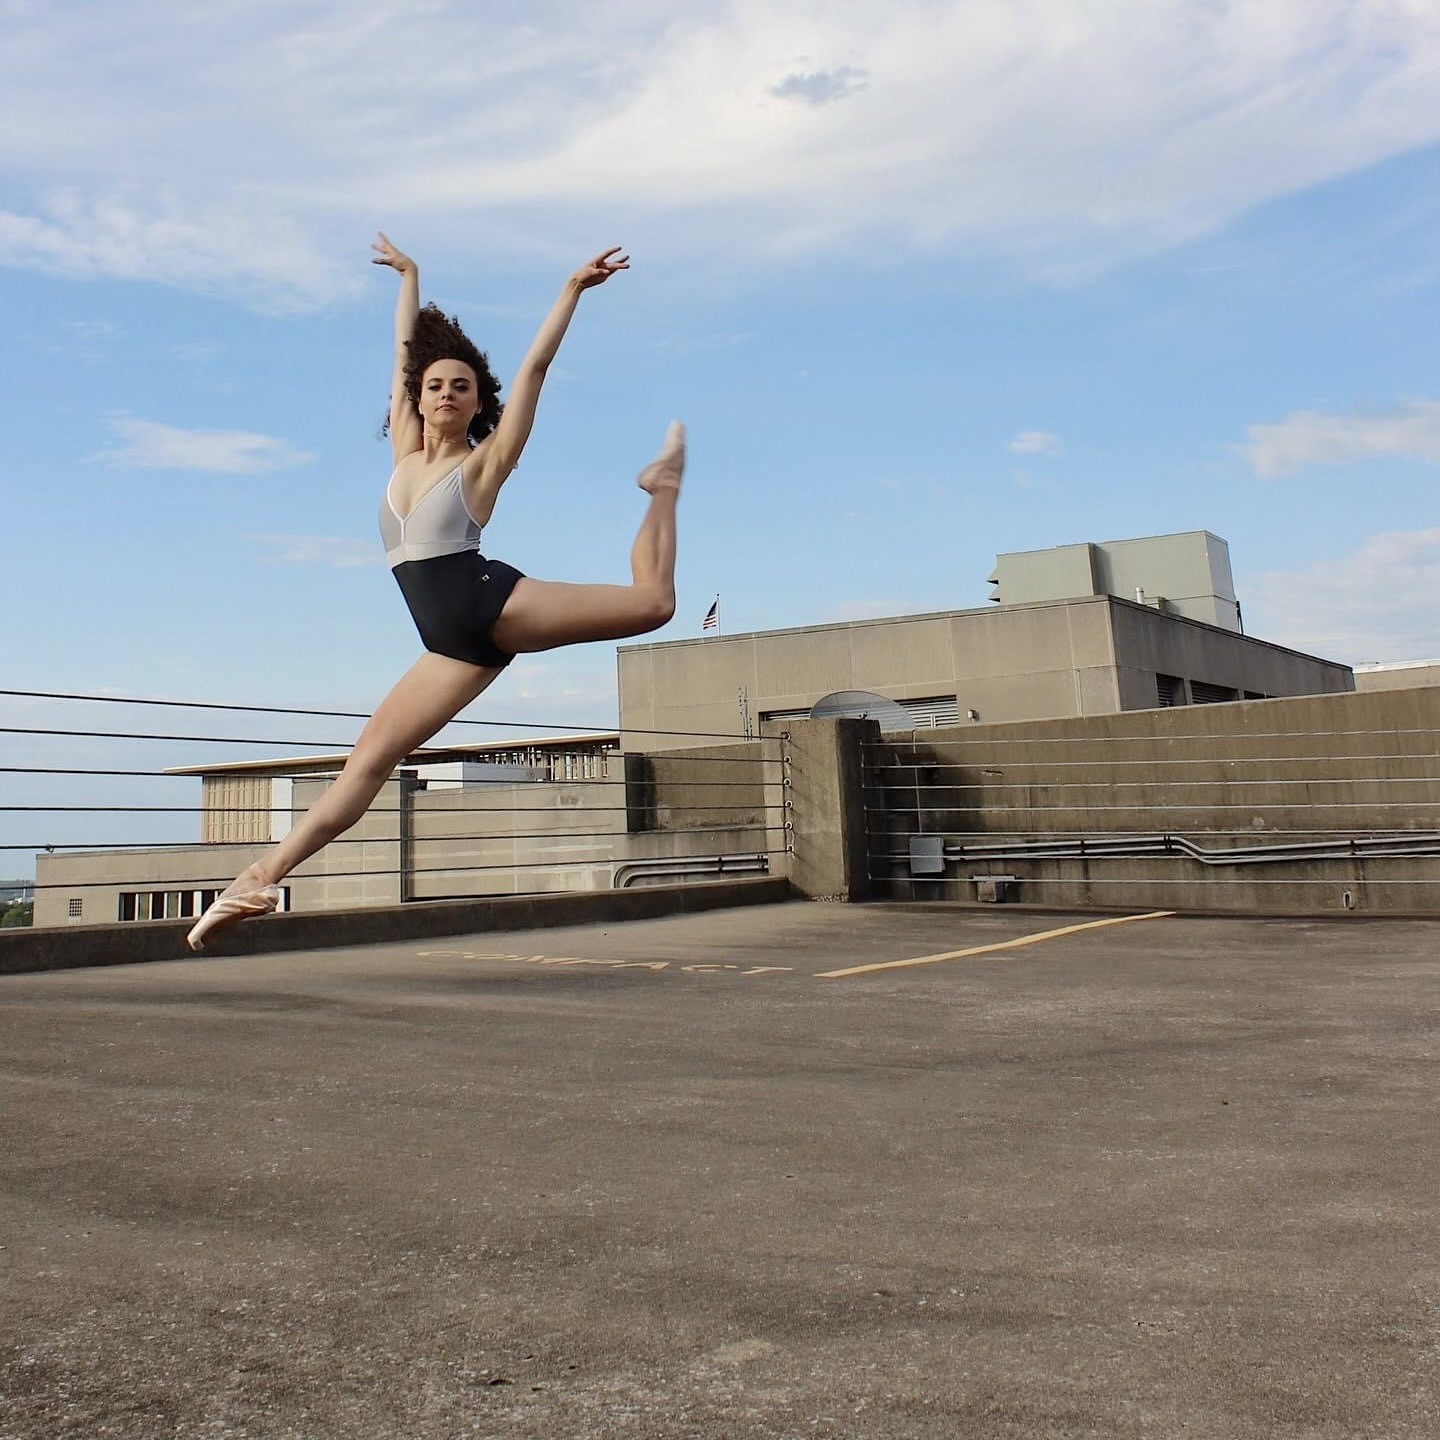 BSN Student Molly Yeo as former dancer, leaping into air